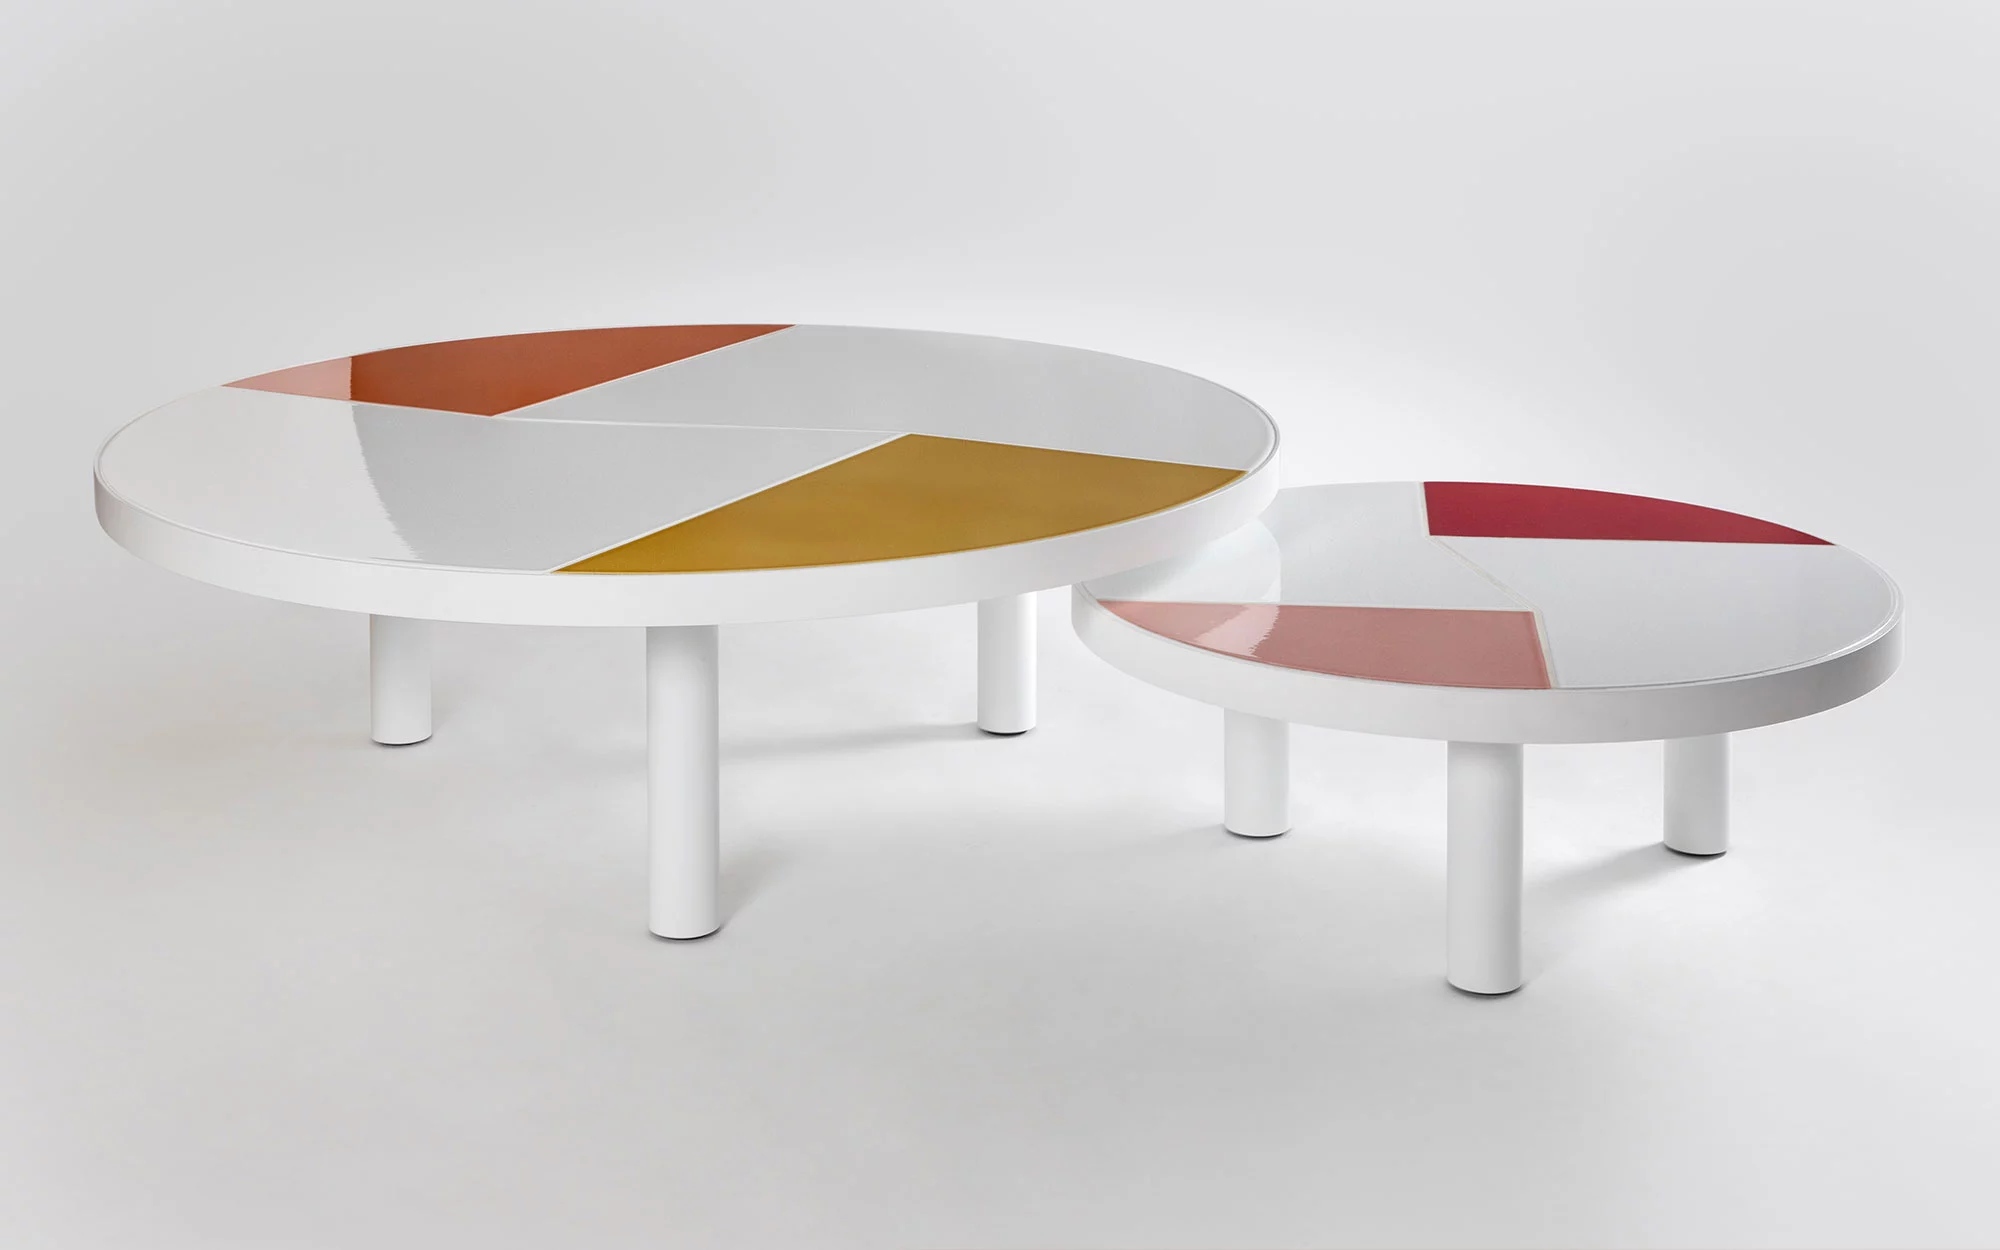 Fraction Coffee Table - Pierre Charpin - Coffee table - Galerie kreo